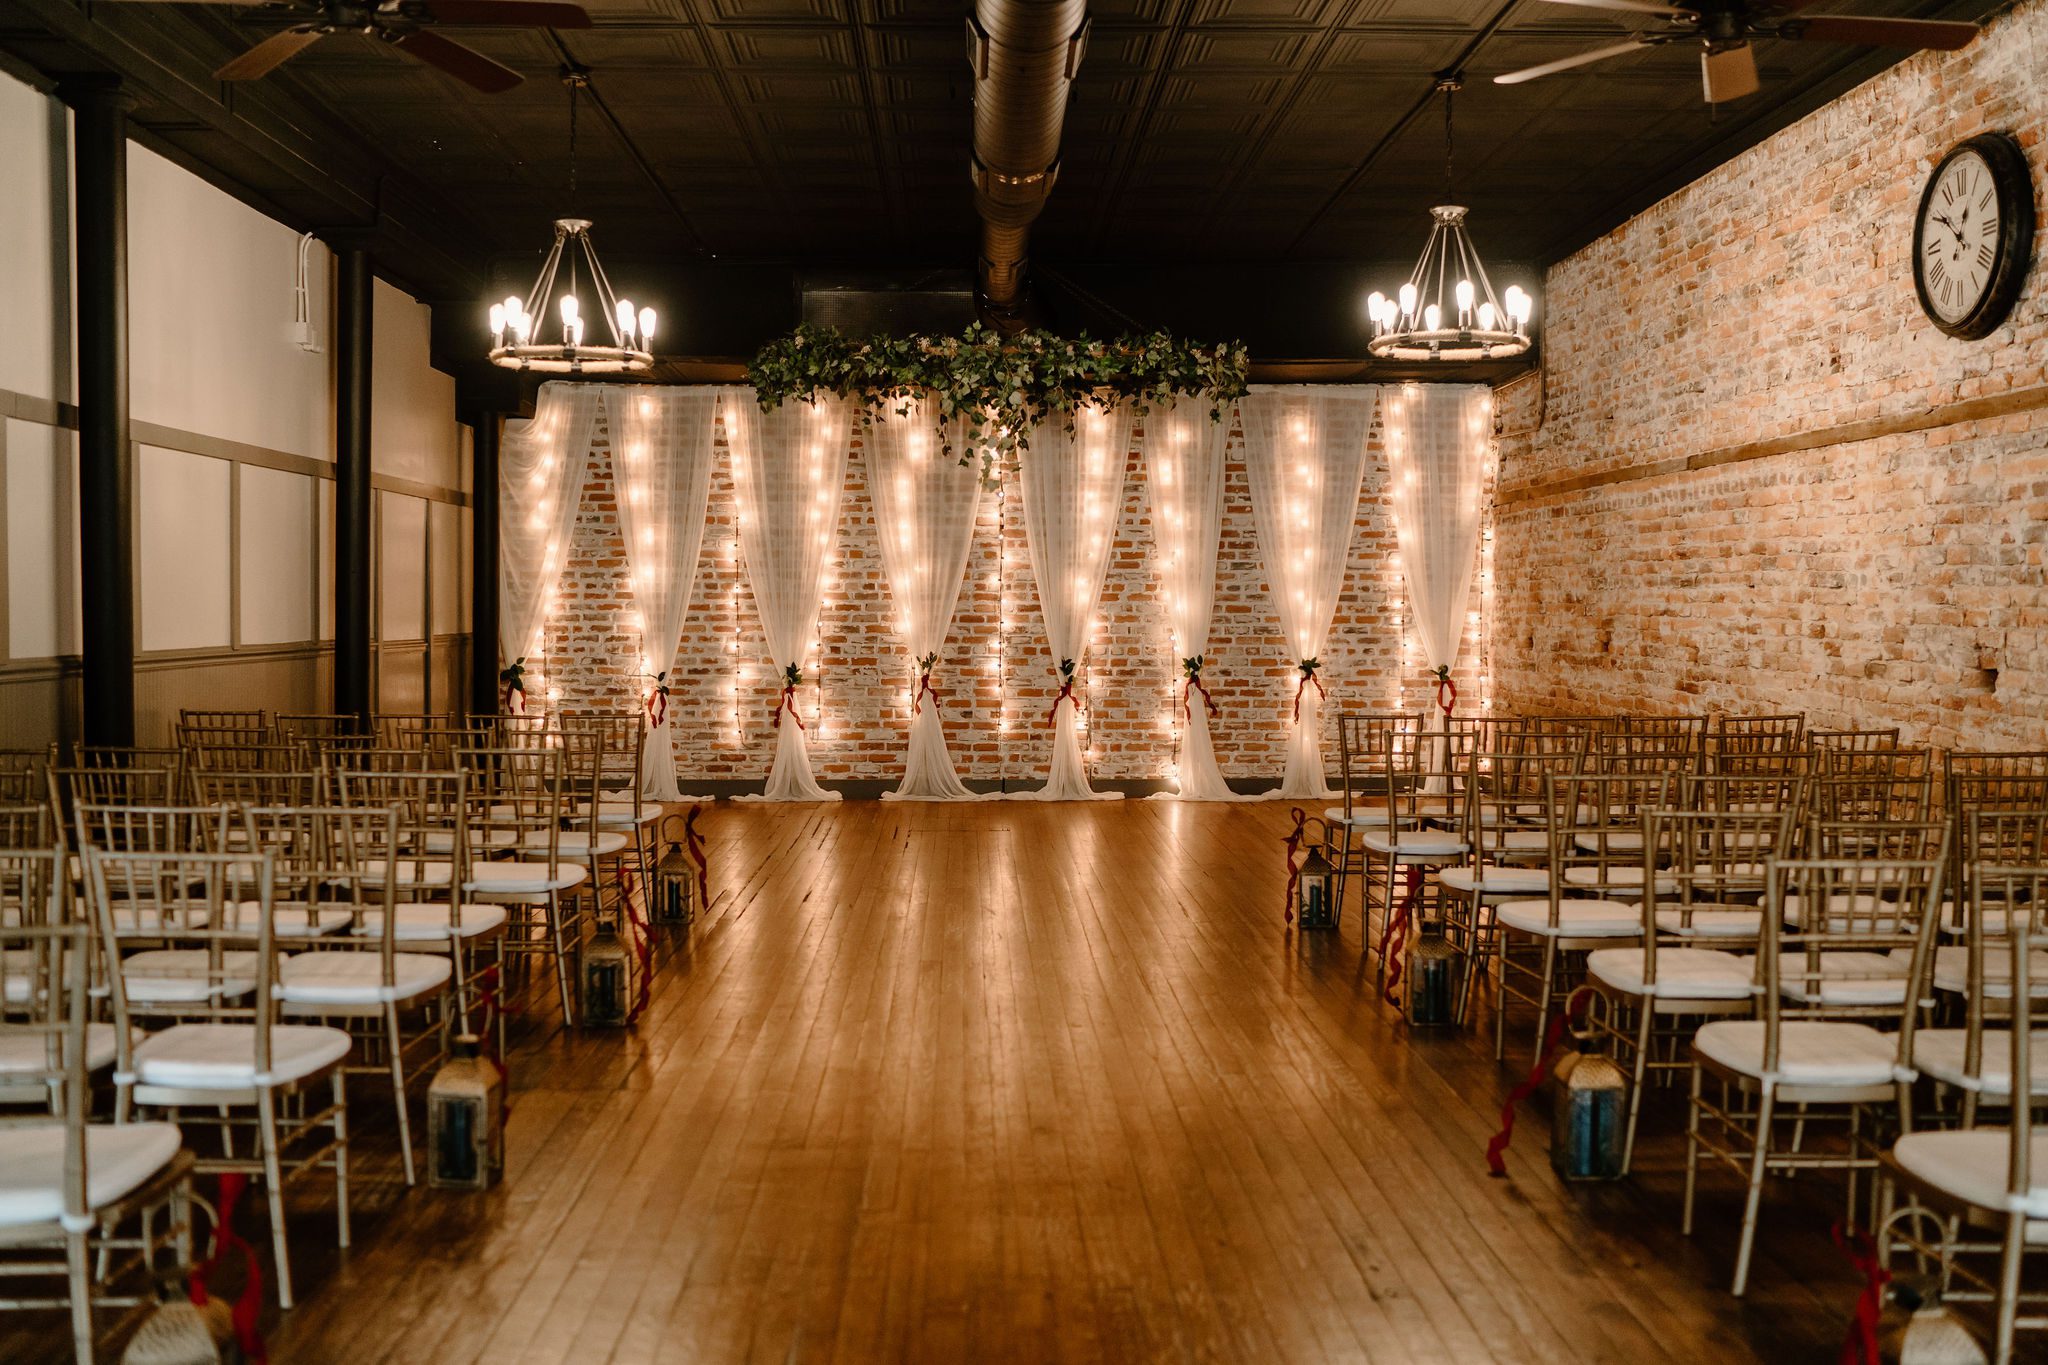 Details of Bakery 1818 venue in North Carolina during Christmas themed bride and groom photos with bridal party and friends and family
